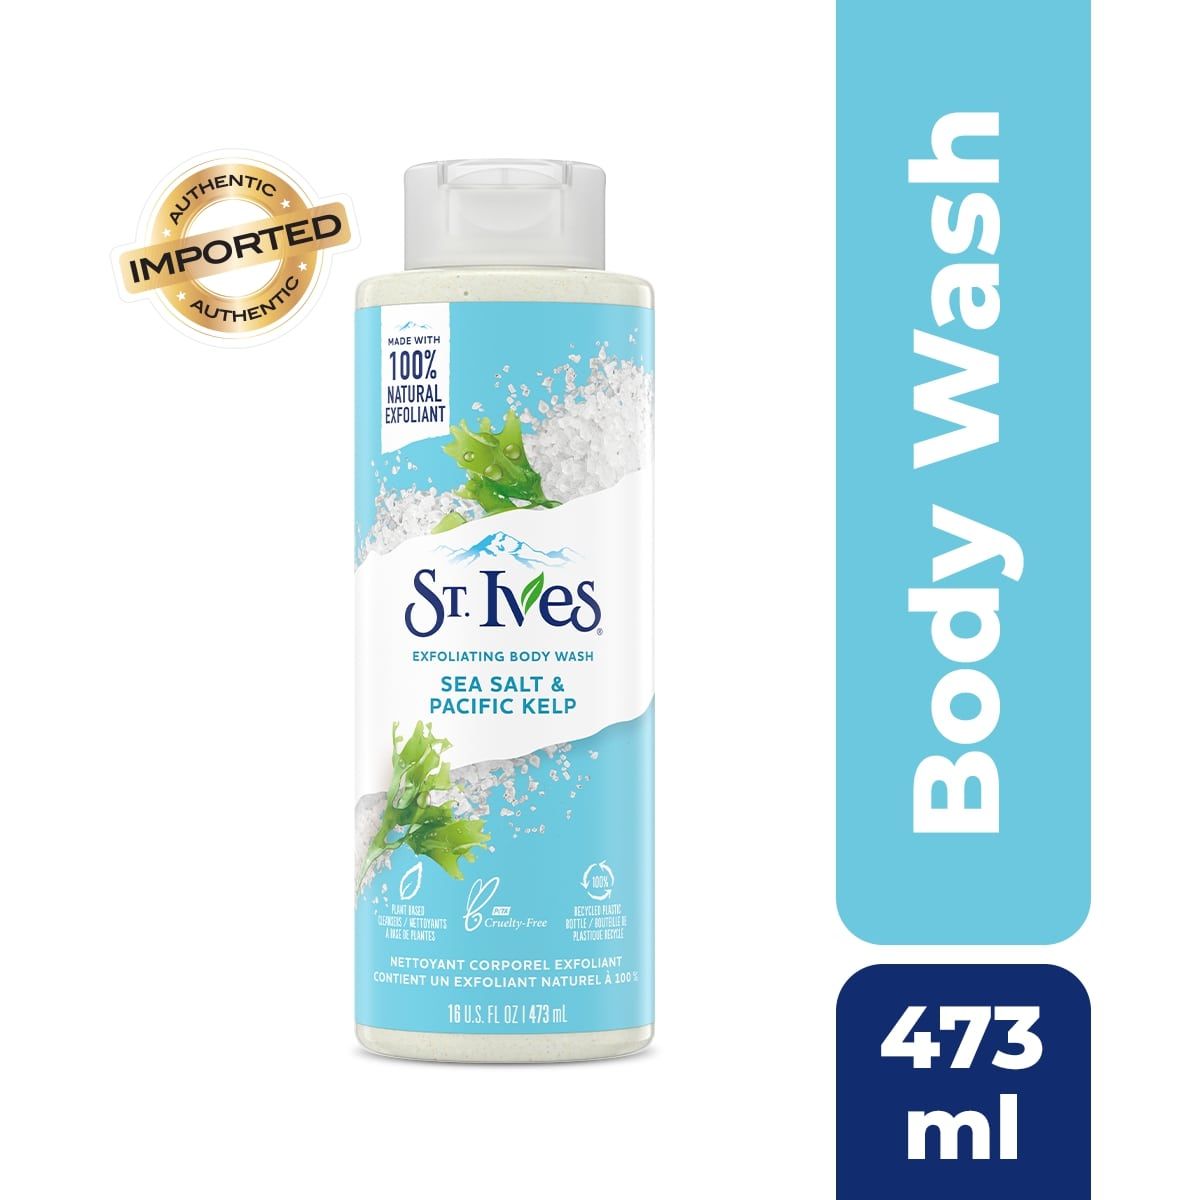 St. Ives Exfoliating Sea salt & Pacific Kelp Flavour Body Wash, 473 ml, Pack of 1 